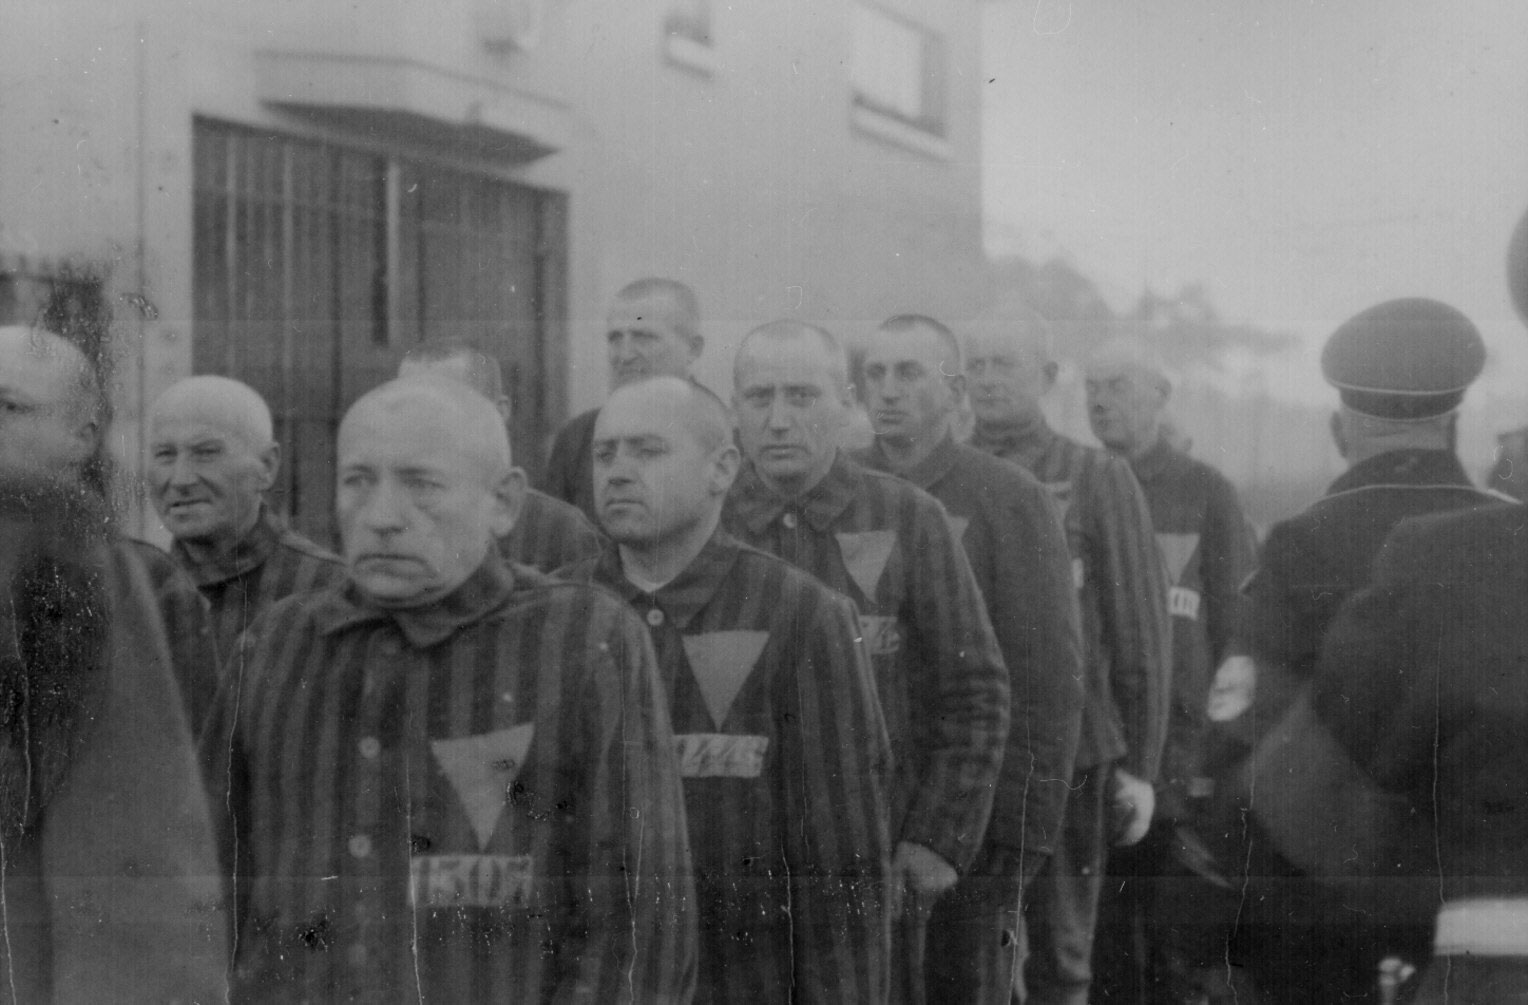 Prisoners in the concentration camp at Sachsenhausen, Germany, 19 Dec 1938